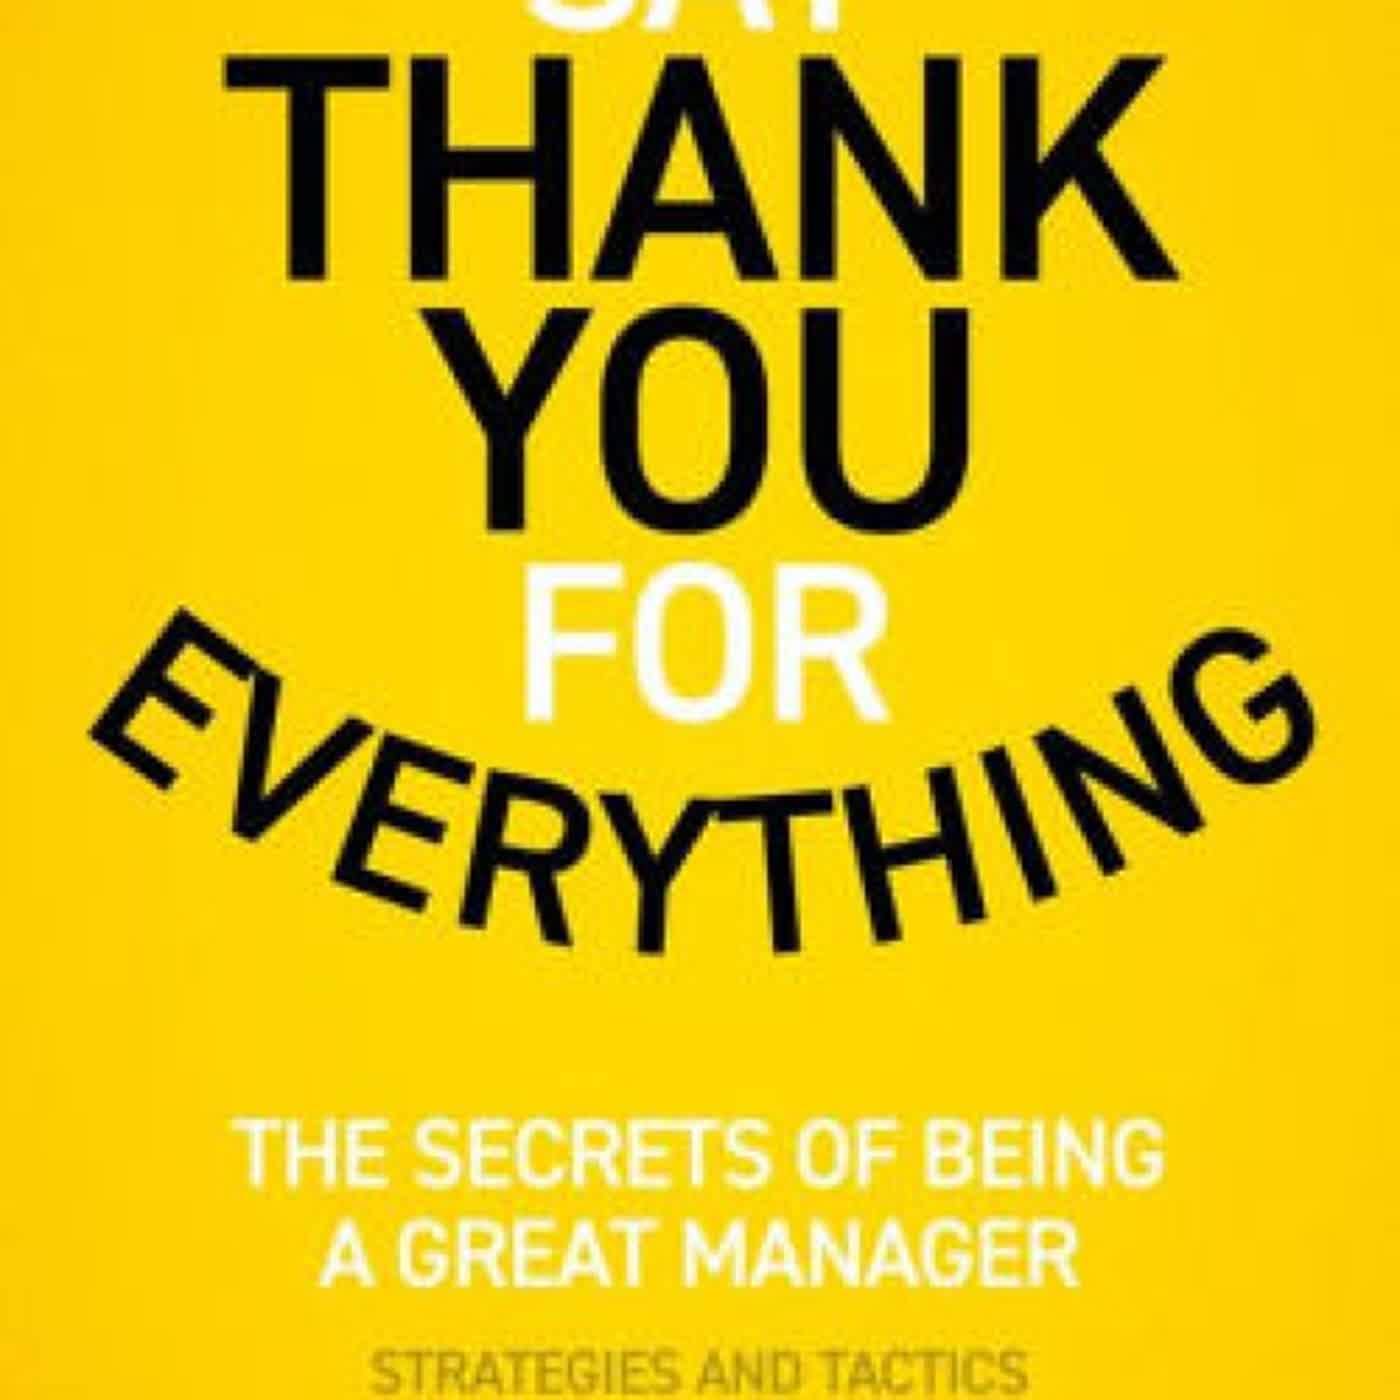 Download PDF Say Thank You for Everything: The secrets of being a great manager - strategies and tactics that get results by Jim Edwards